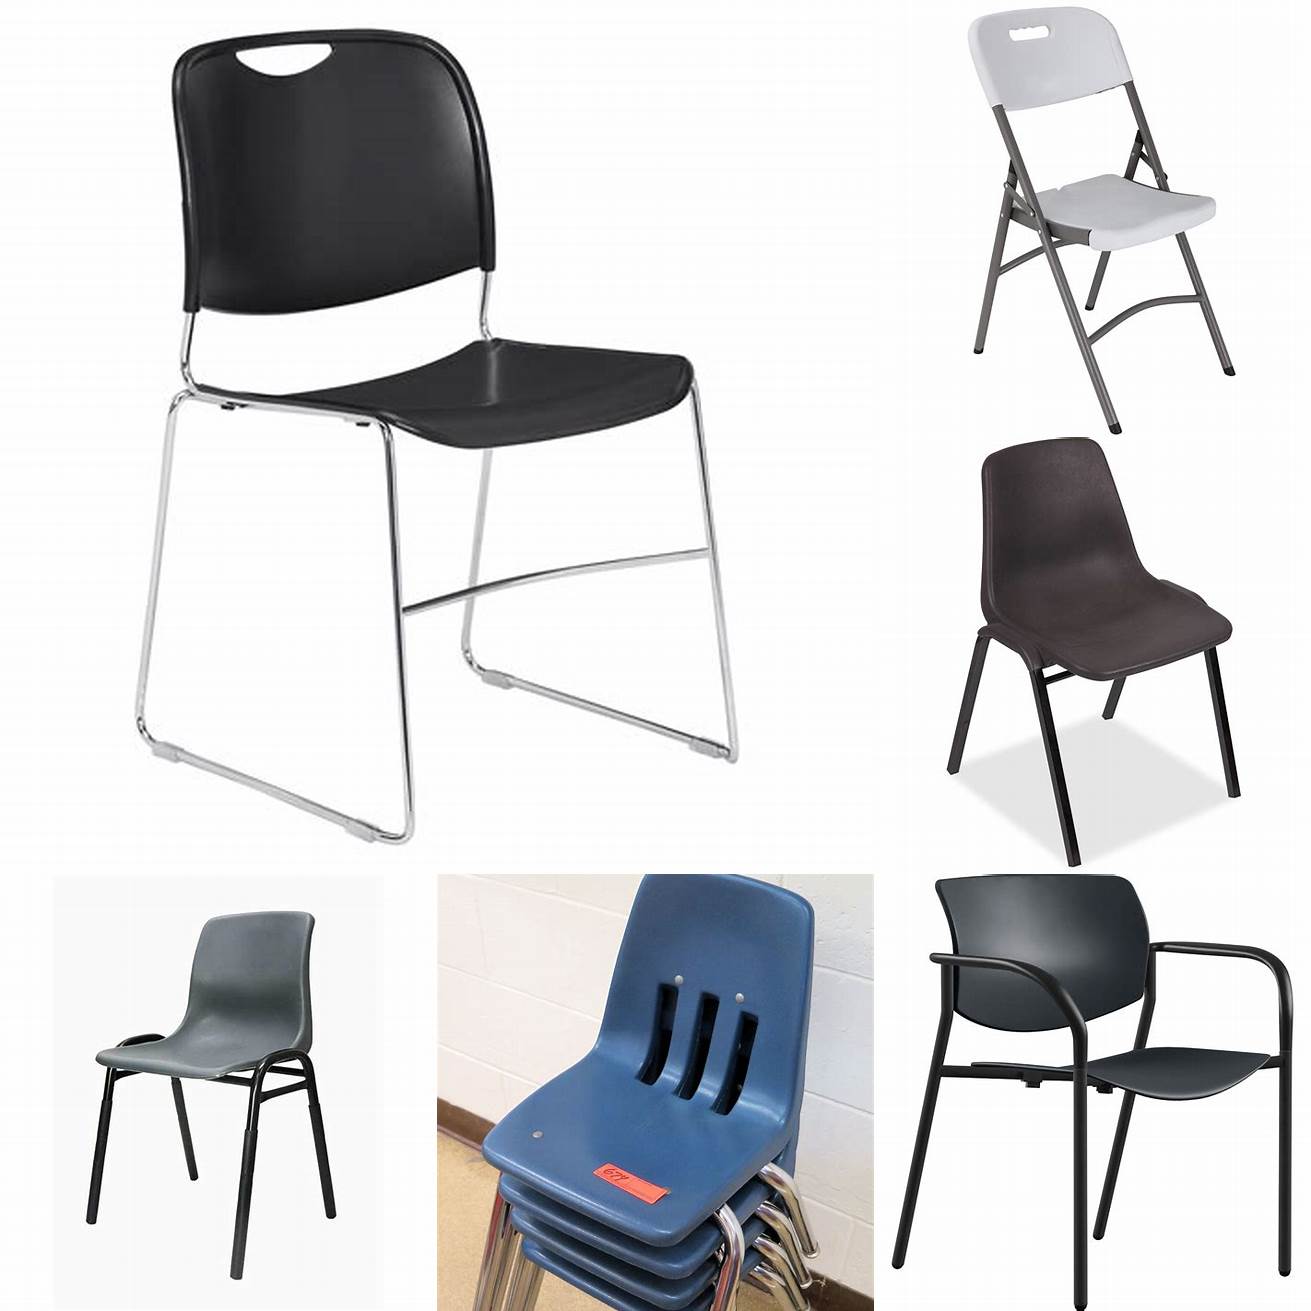 Metal and Plastic Chairs